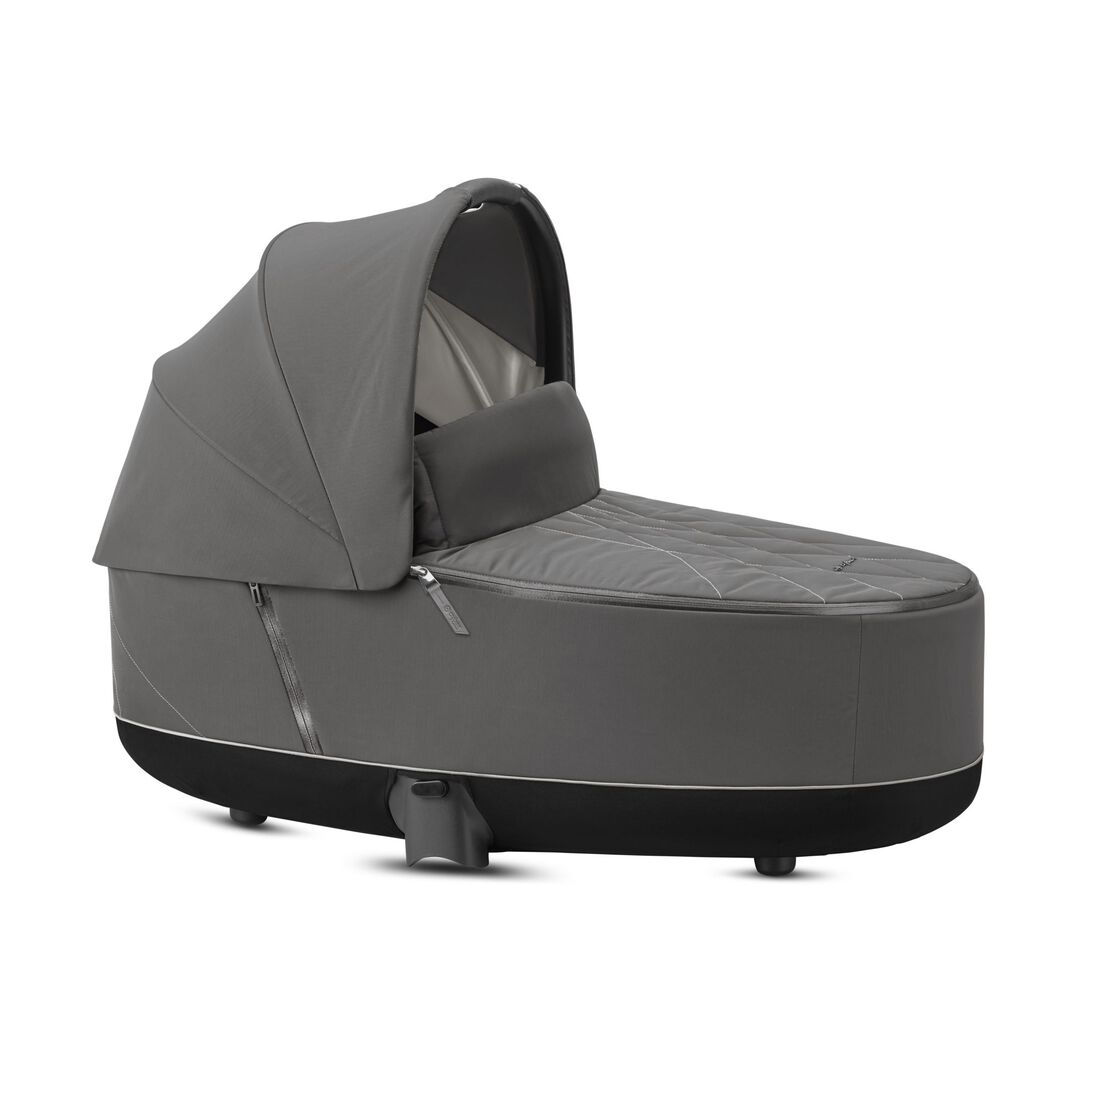 CYBEX Priam 3 Lux Carry Cot - Soho Grey in Soho Grey large image number 1